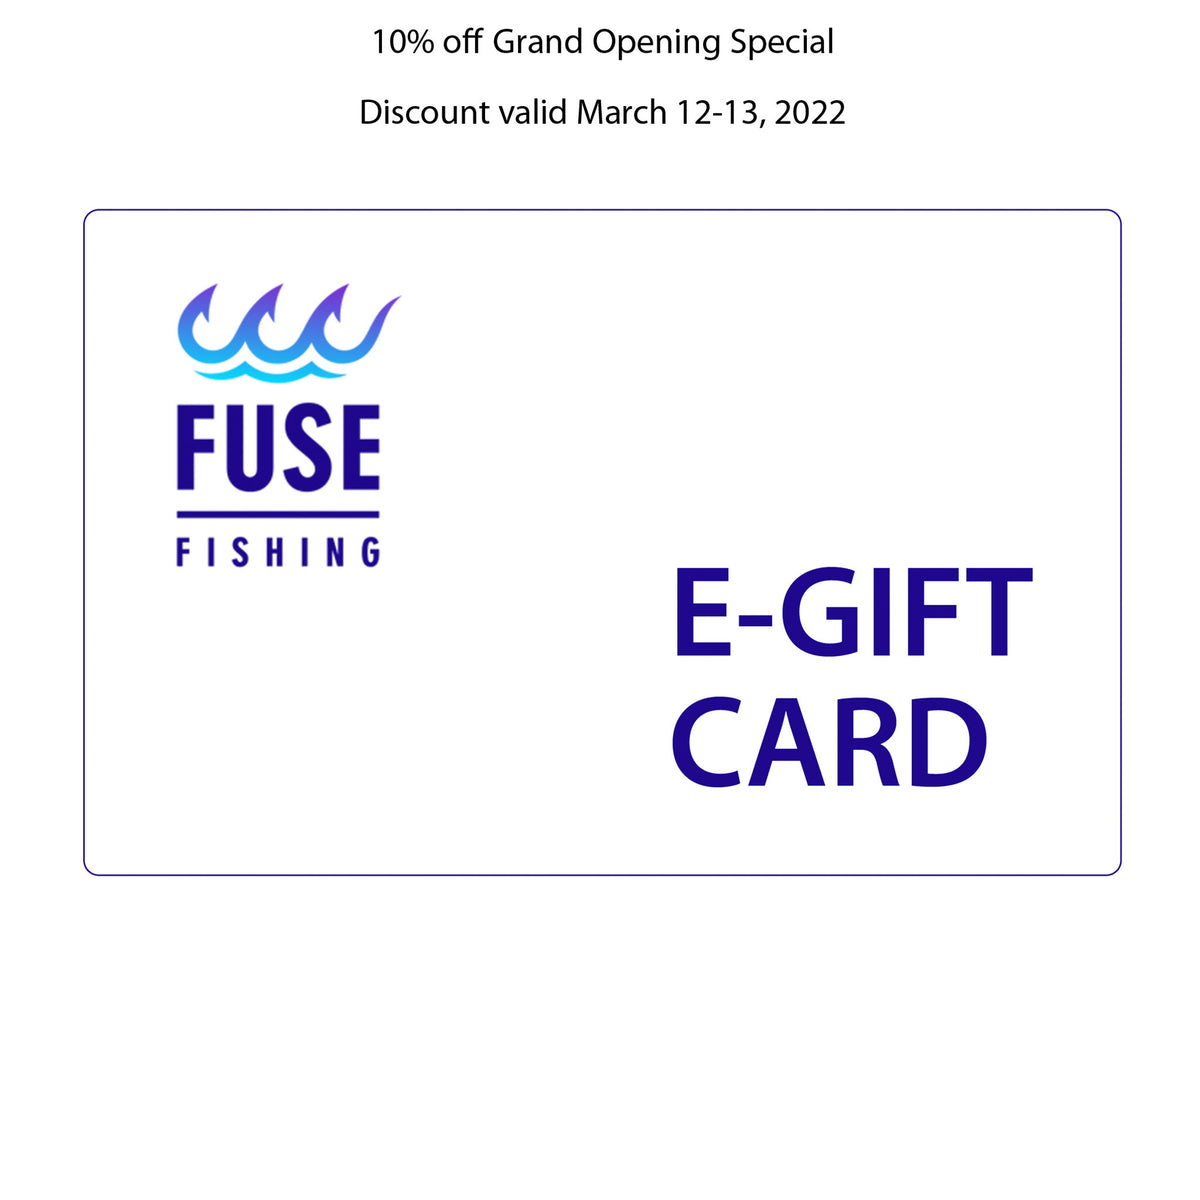 FUSE Fishing Gift Card